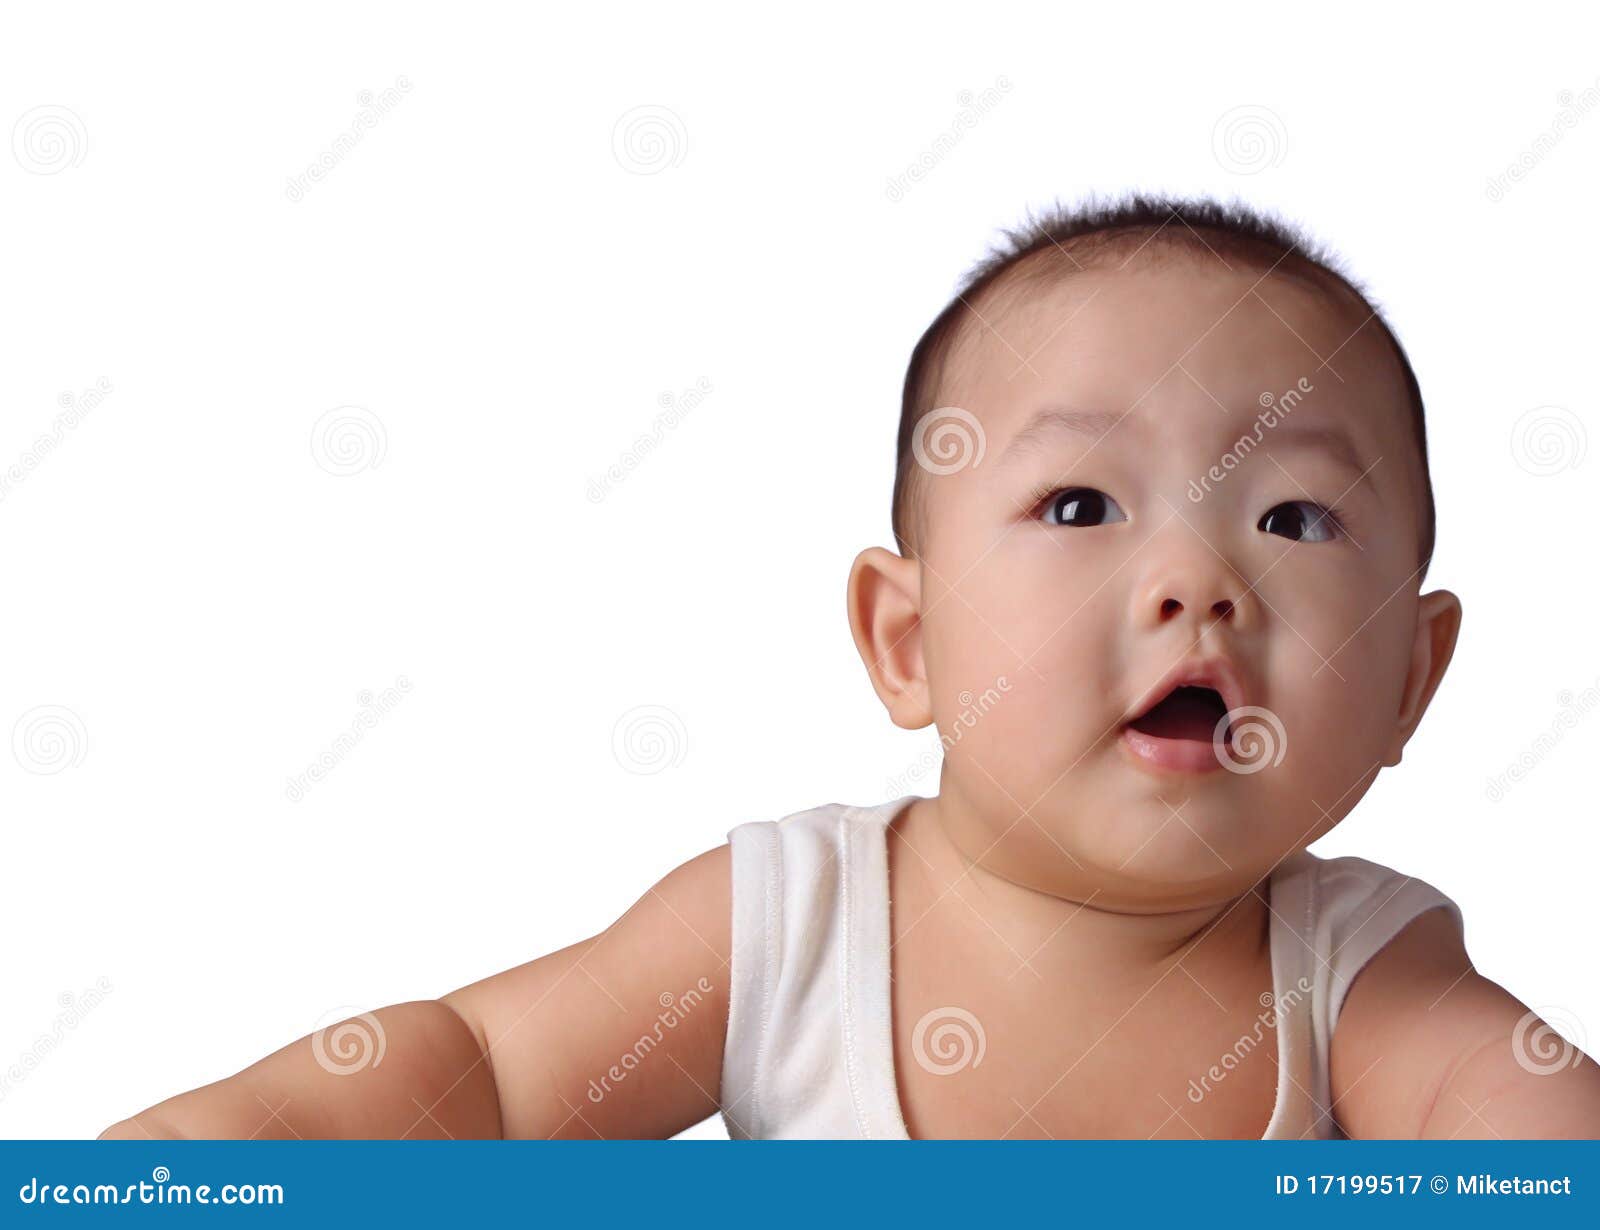 6,500+ Baby Looking Upward Stock Photos, Pictures & Royalty-Free Images -  iStock